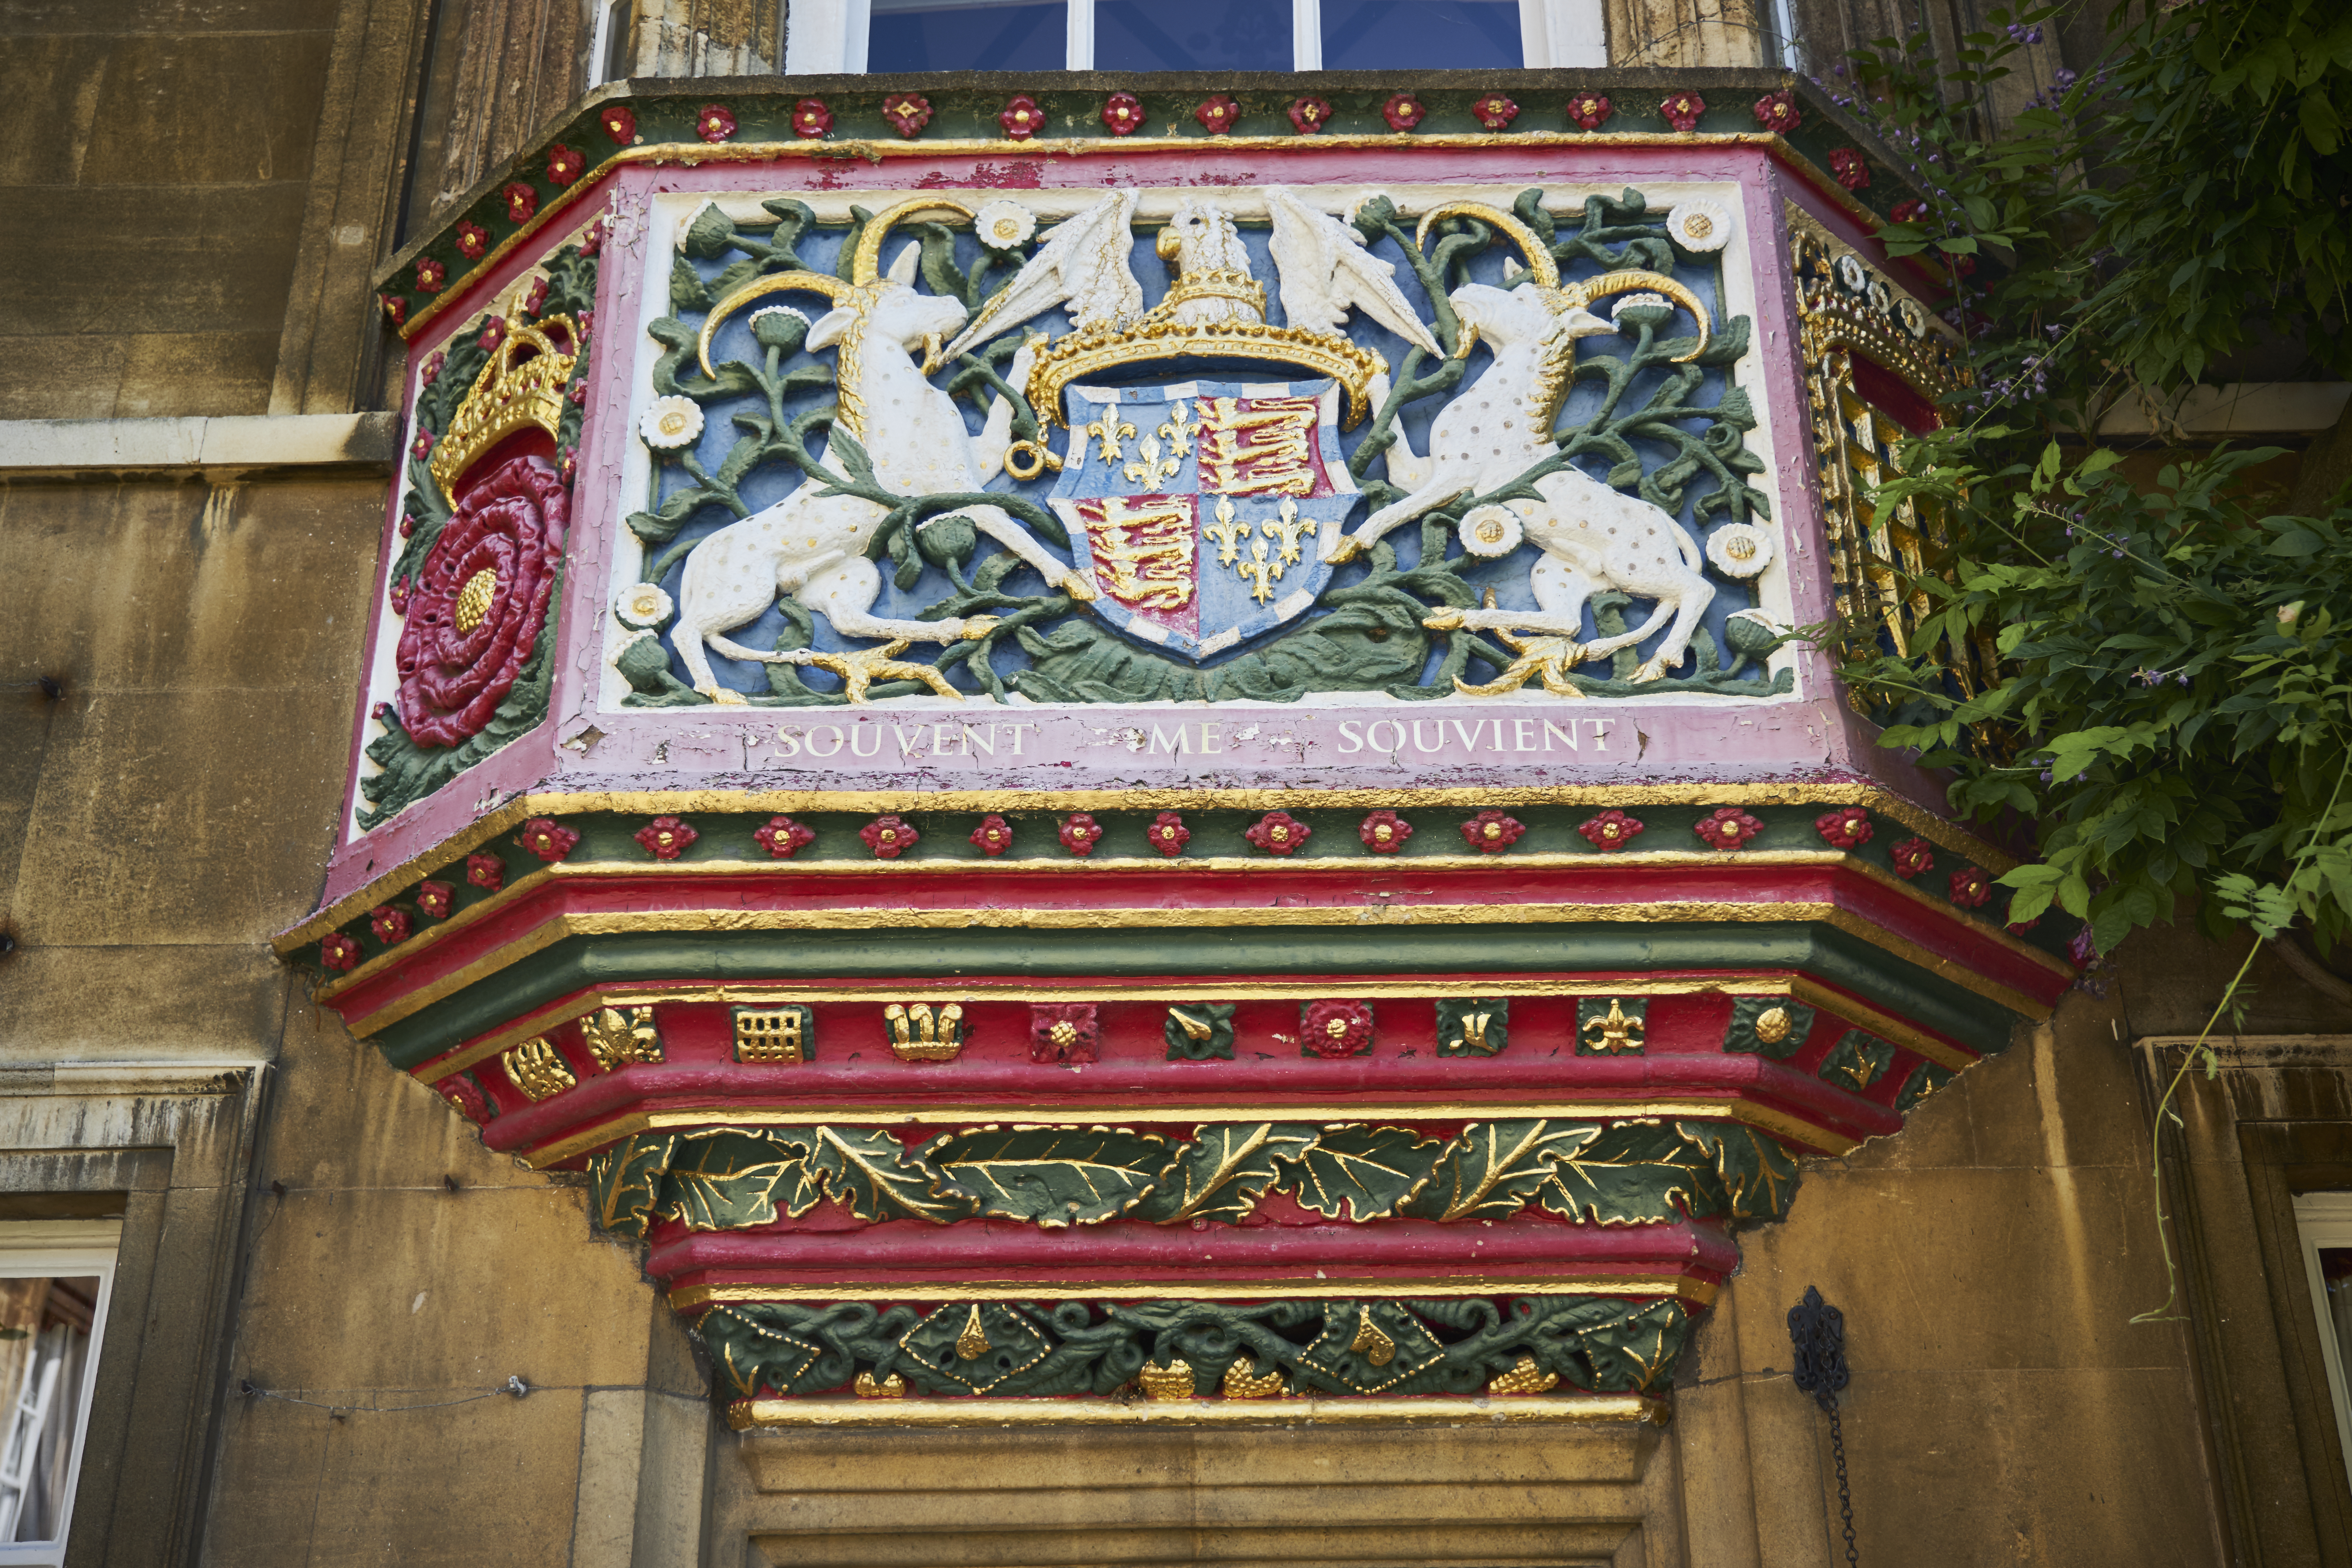 Christ's College decorations in first court